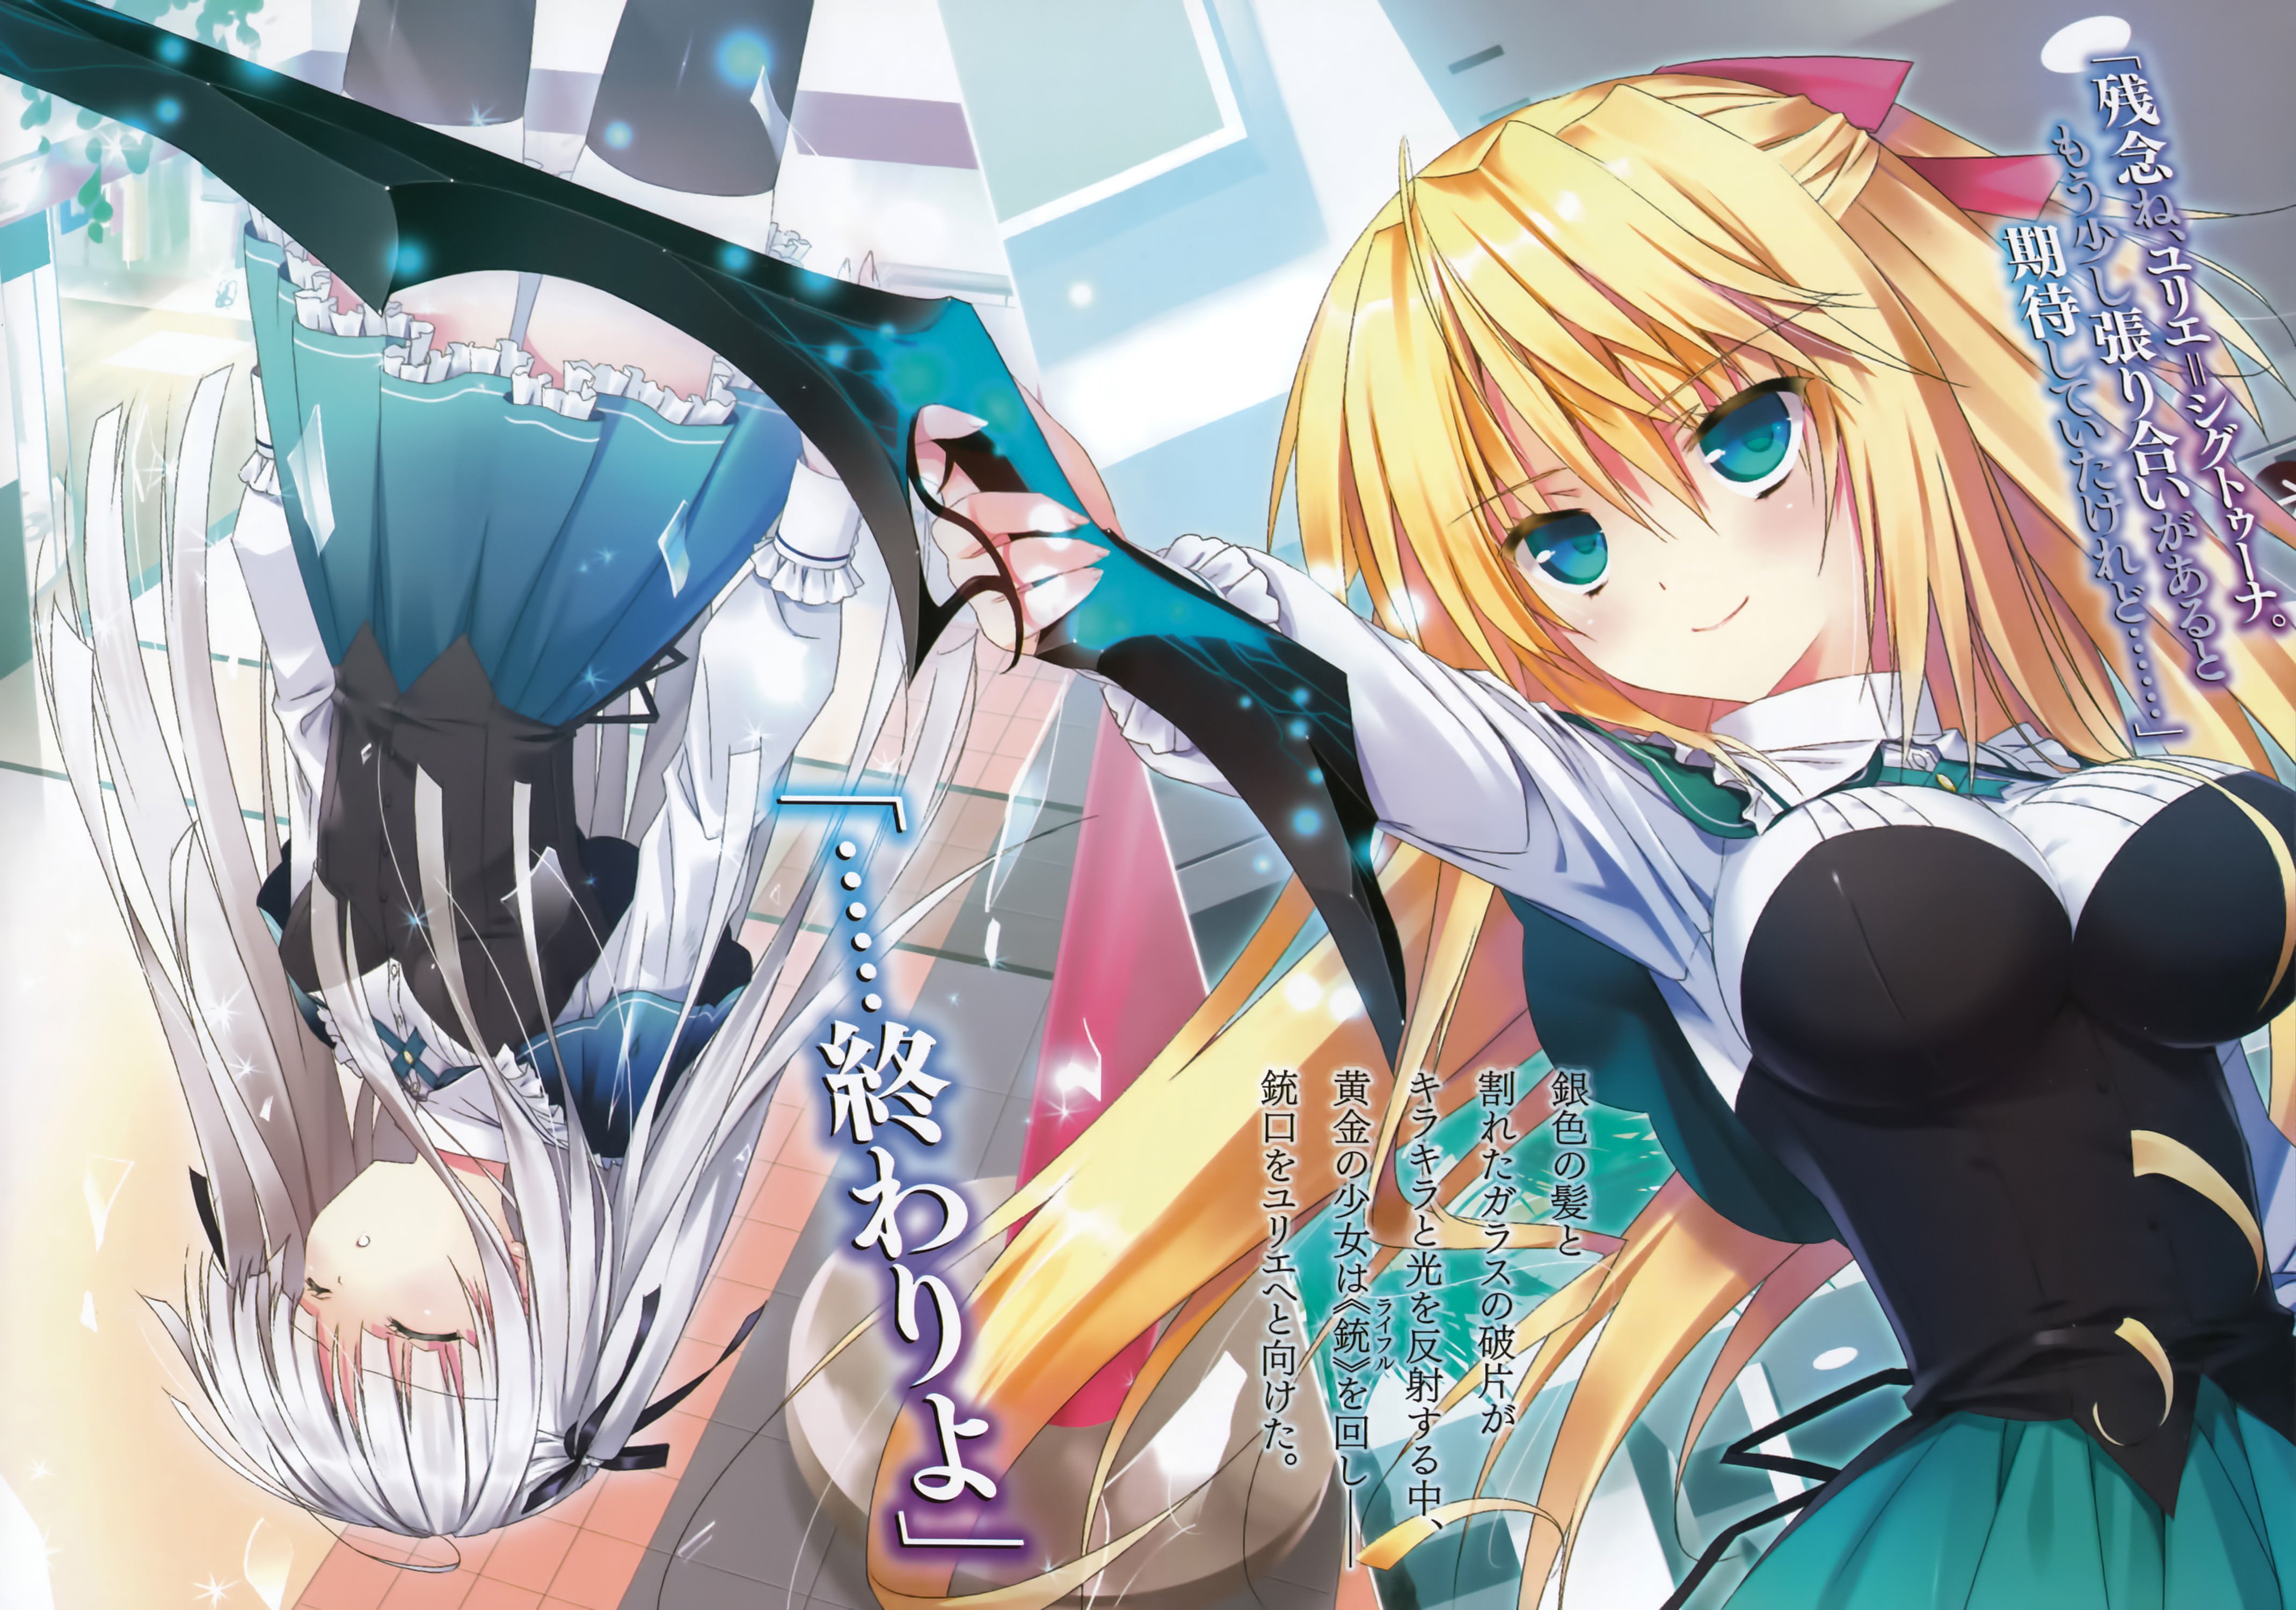 Anime Anime Girls Anime Games Absolute Duo Julie Sigtuna Absolute Duo Lilith Bristol Absolute Duo As 4277x3000